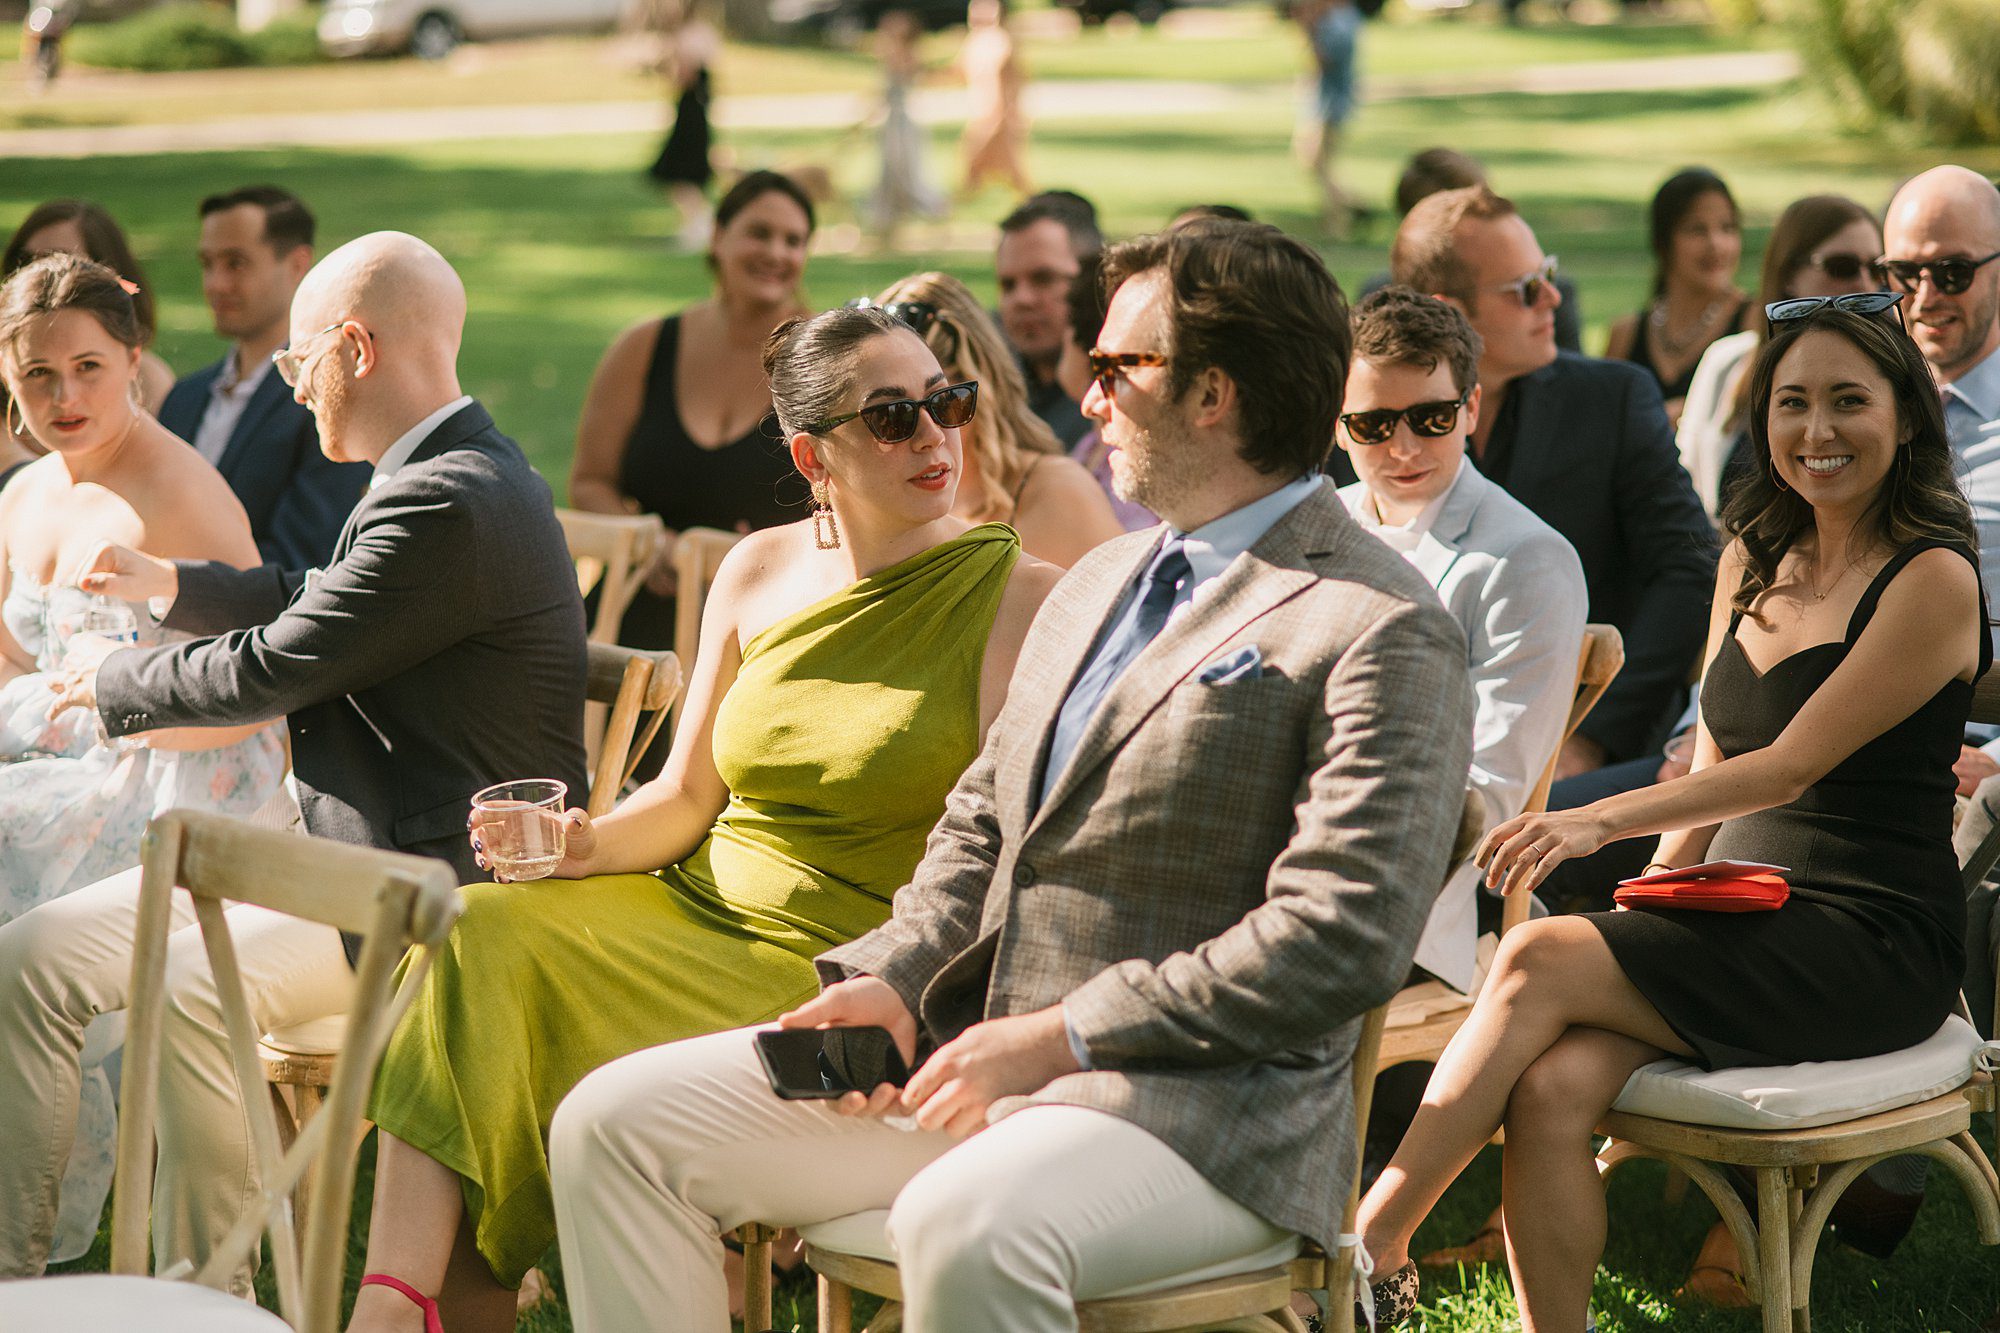 guests wait in the shade for their friends Washington Park Boathouse wedding in downtown Denver to begin